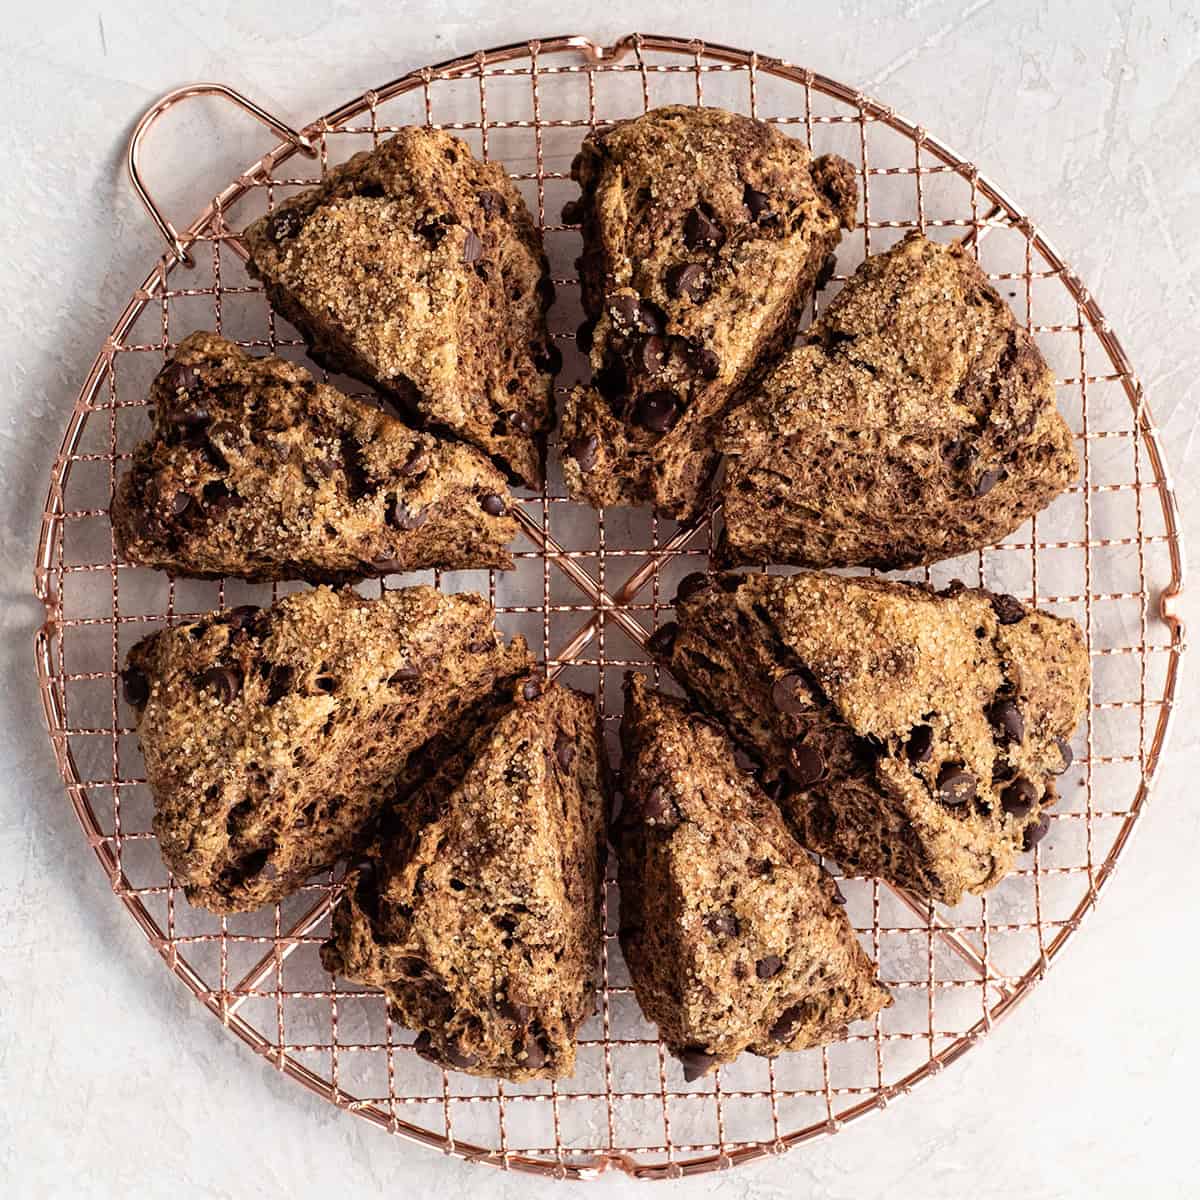 8 chocolate scones on a round, wire cooling rack